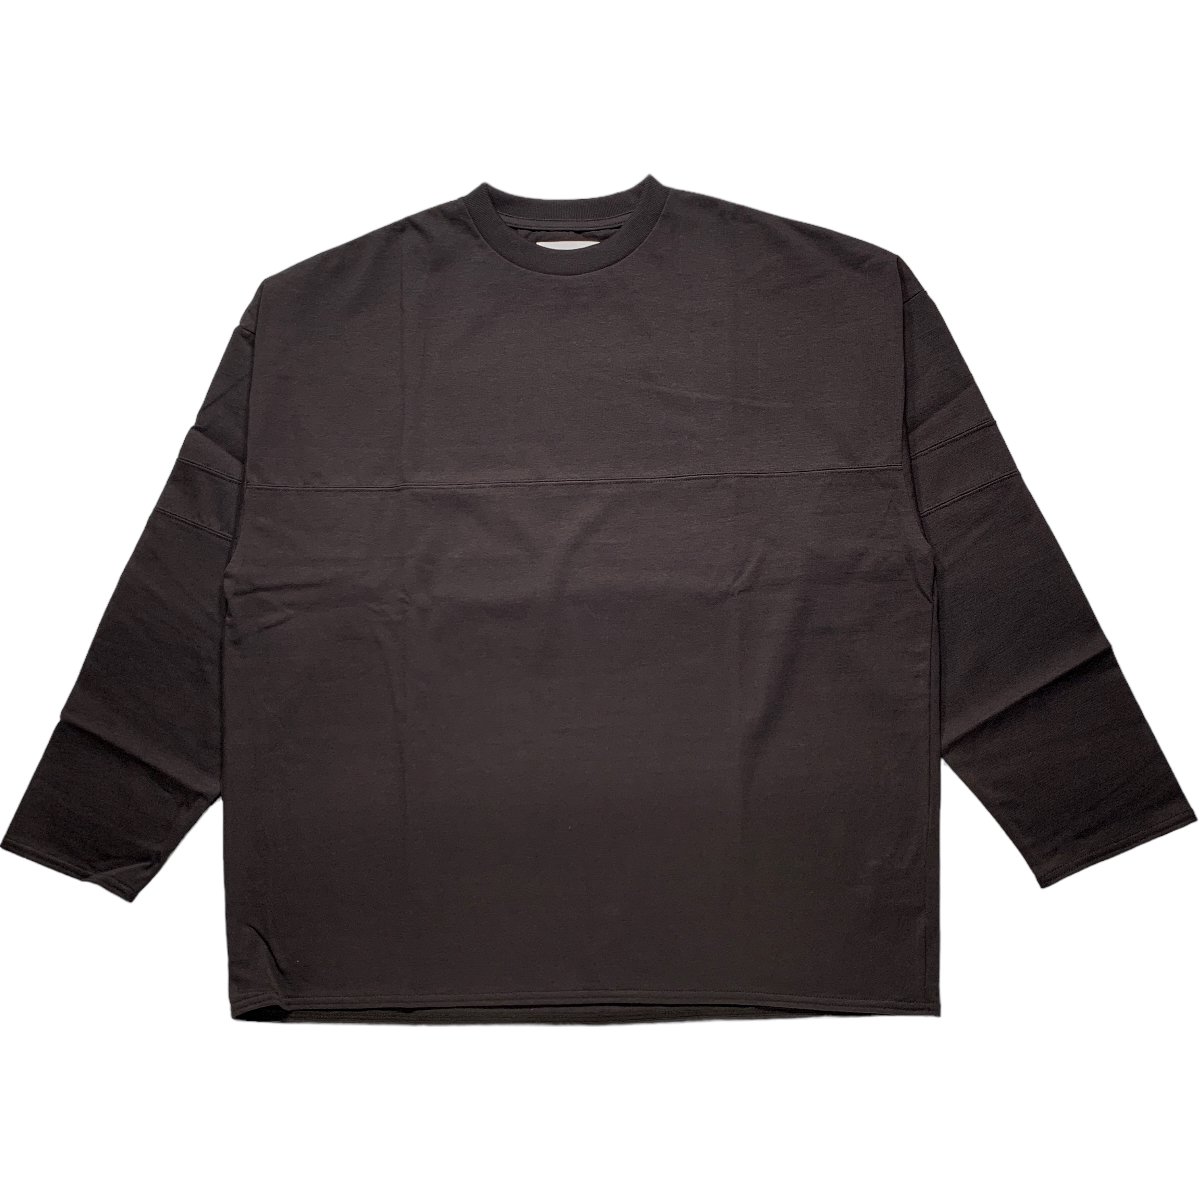 marka <BR>FOOTBALL TEE L/S - 14/- RECYCLE SUVIN ORGANIC COTTON KNIT -(CHARCOAL)